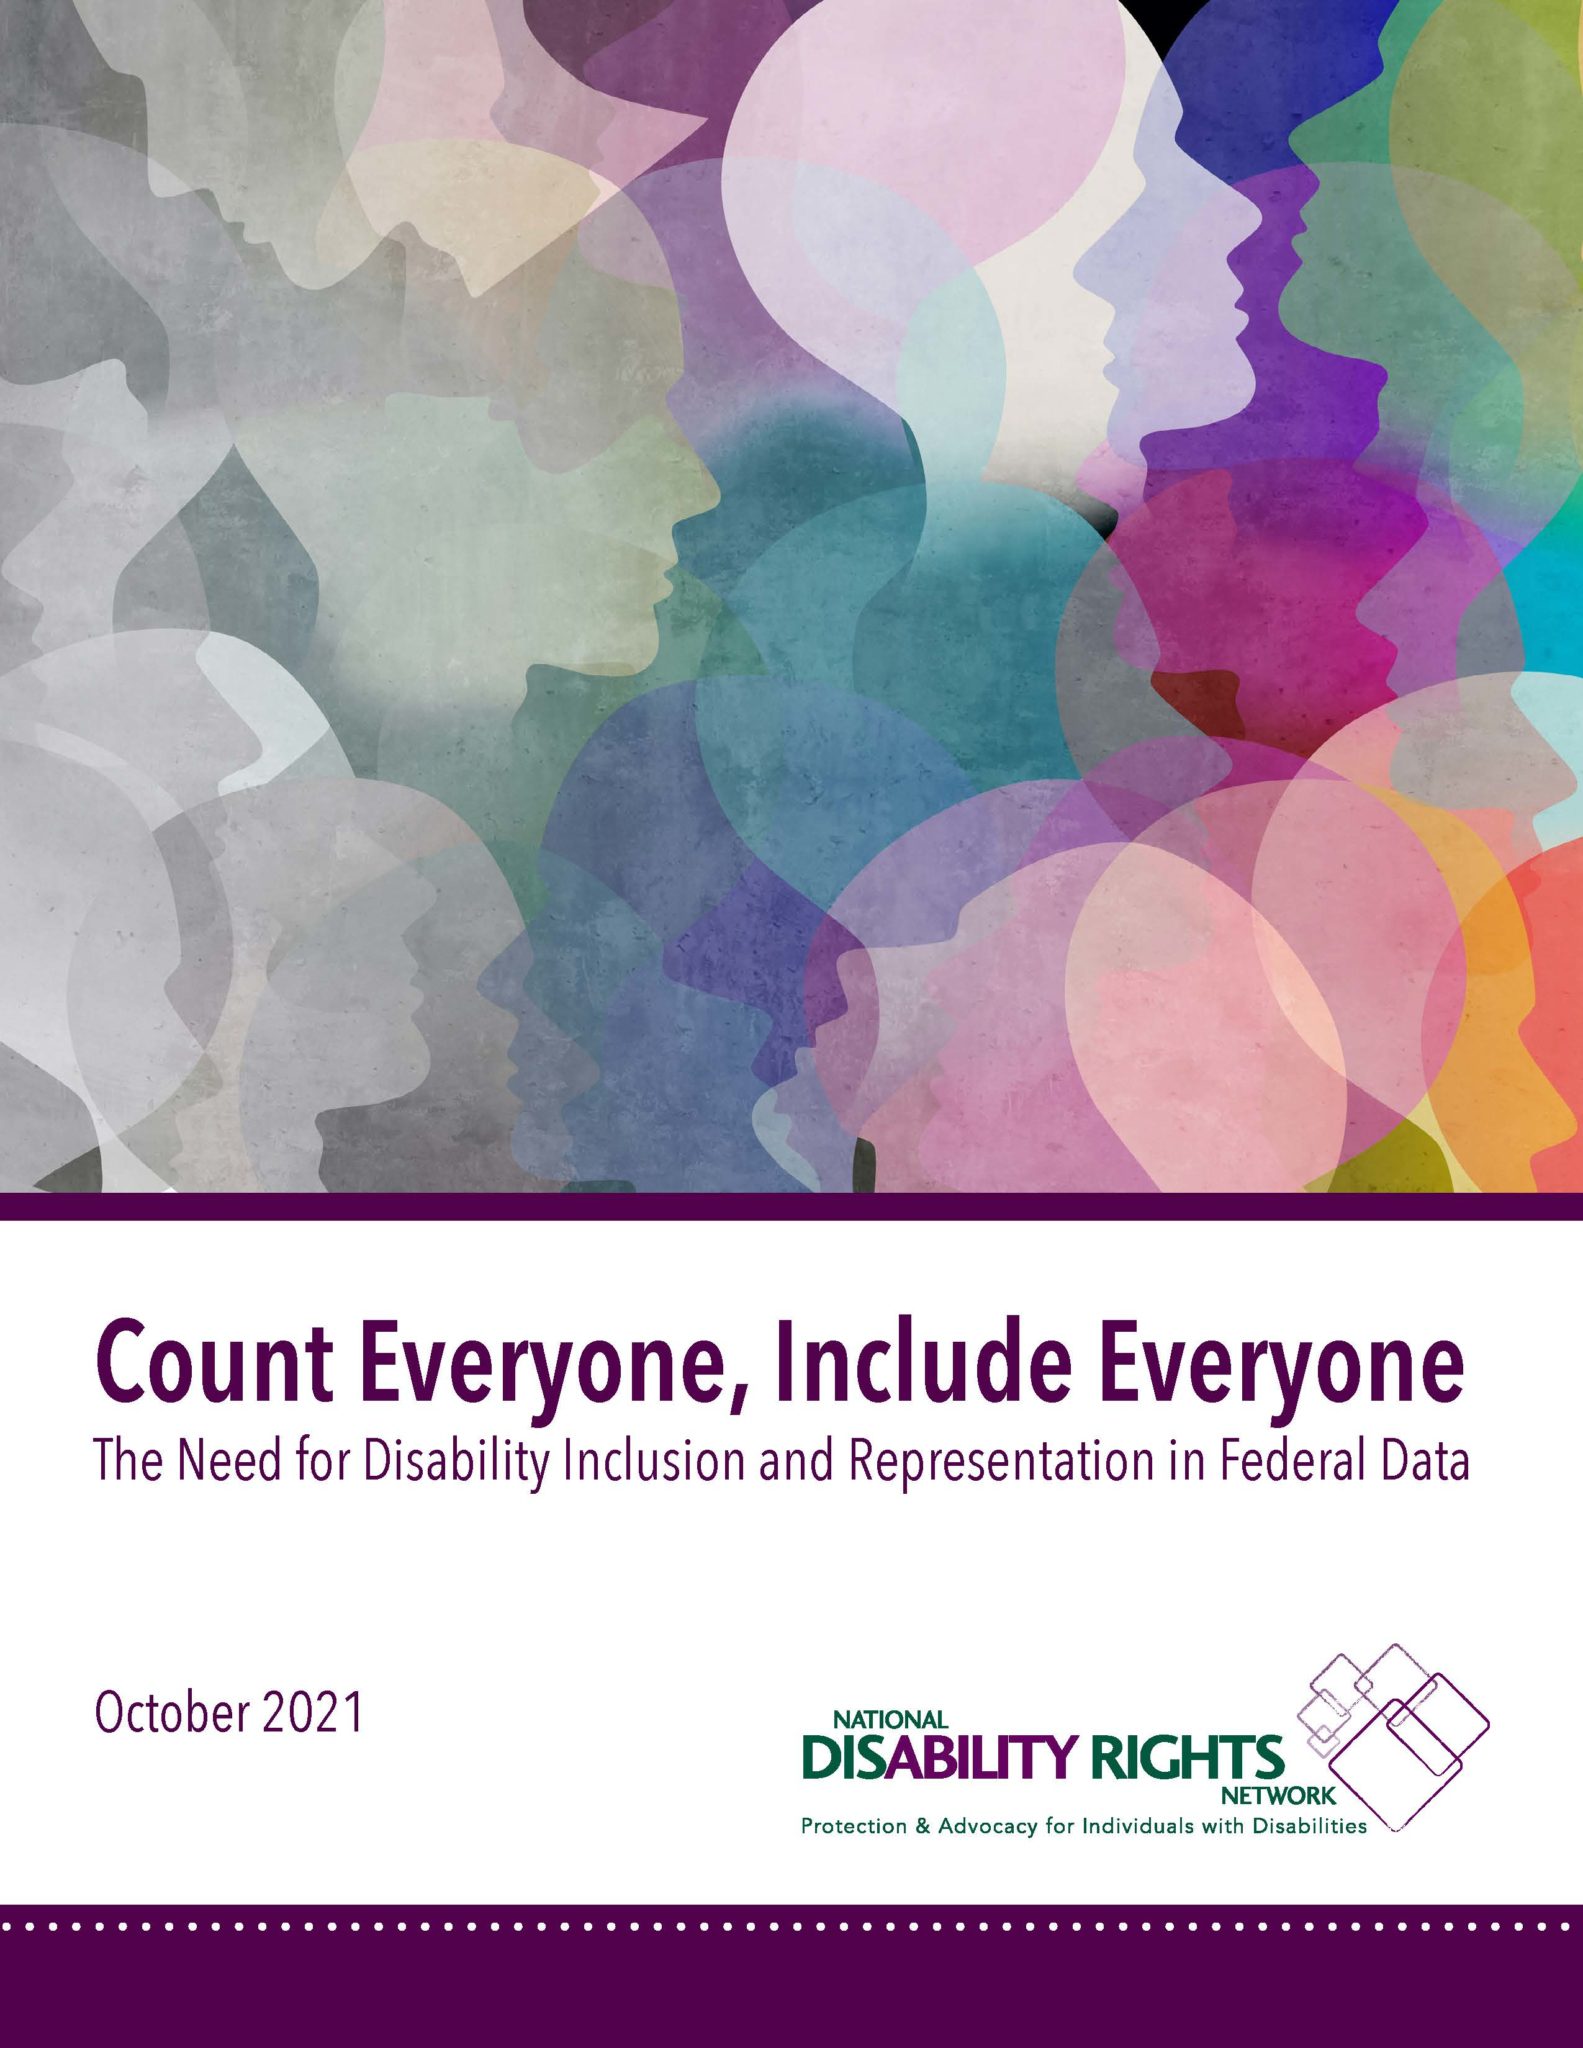 Abstract photo of human head silhouettes fading from black and white to color. Title reads "Count Everyone, Include Everyone: The Need for Disability Inclusion and Representation in Federal Data, October 2021" with the National Disability Rights Network logo